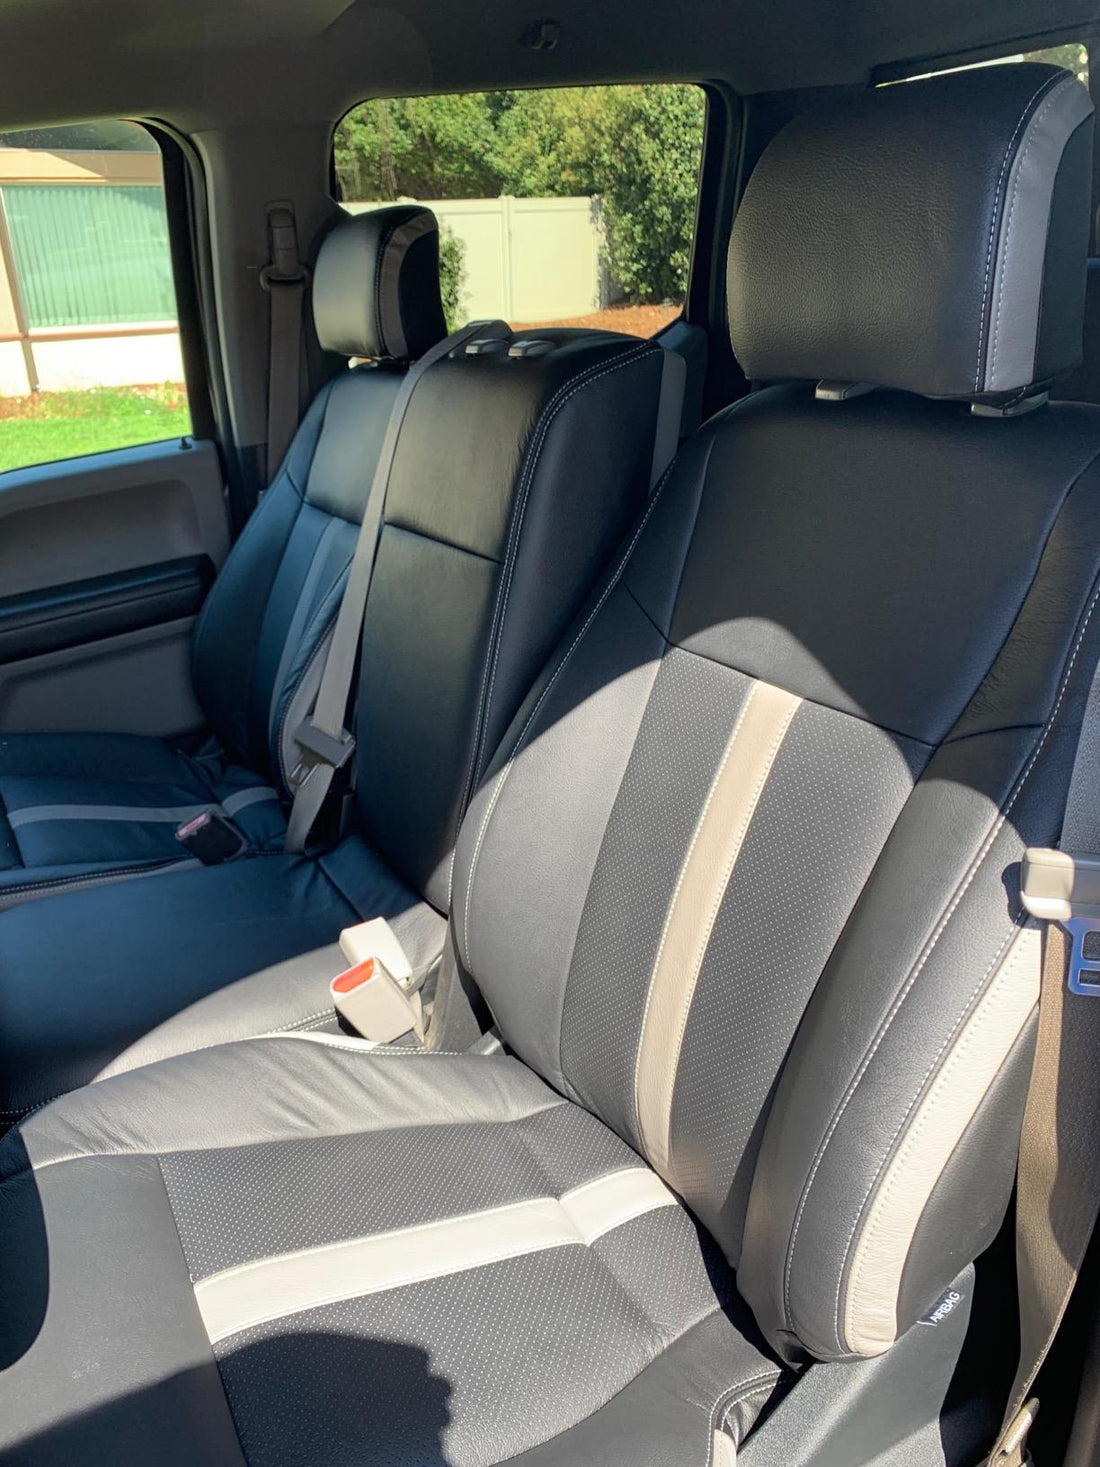 The Best Truck Seat Covers To Buy Now